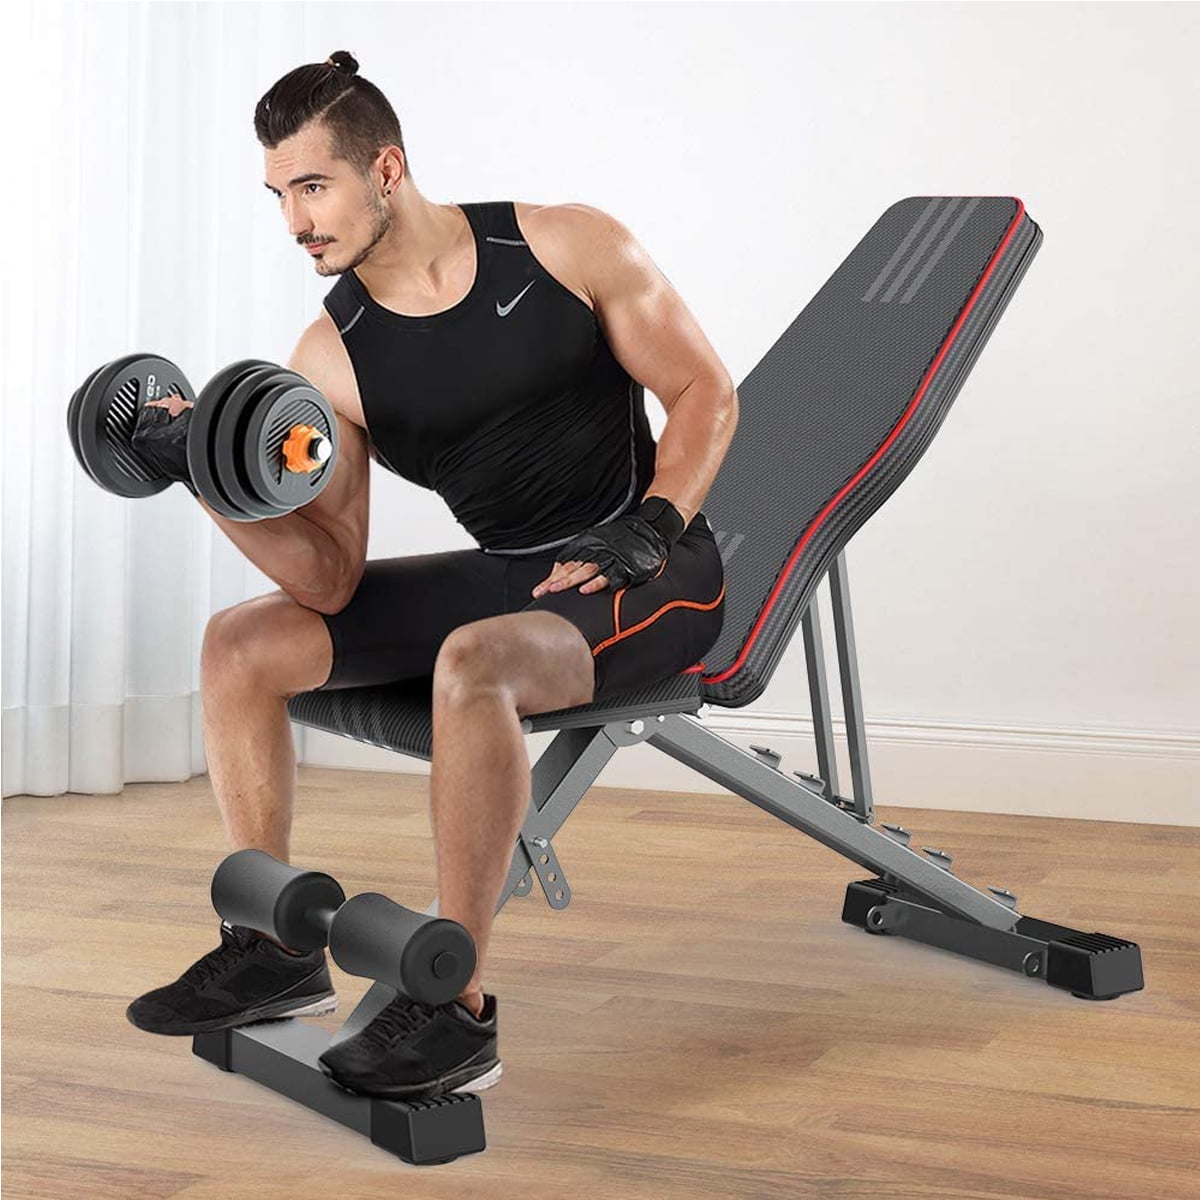 Utility Gym Bench for Full Body Workout Gym Exercise Adjustable Weight Bench 